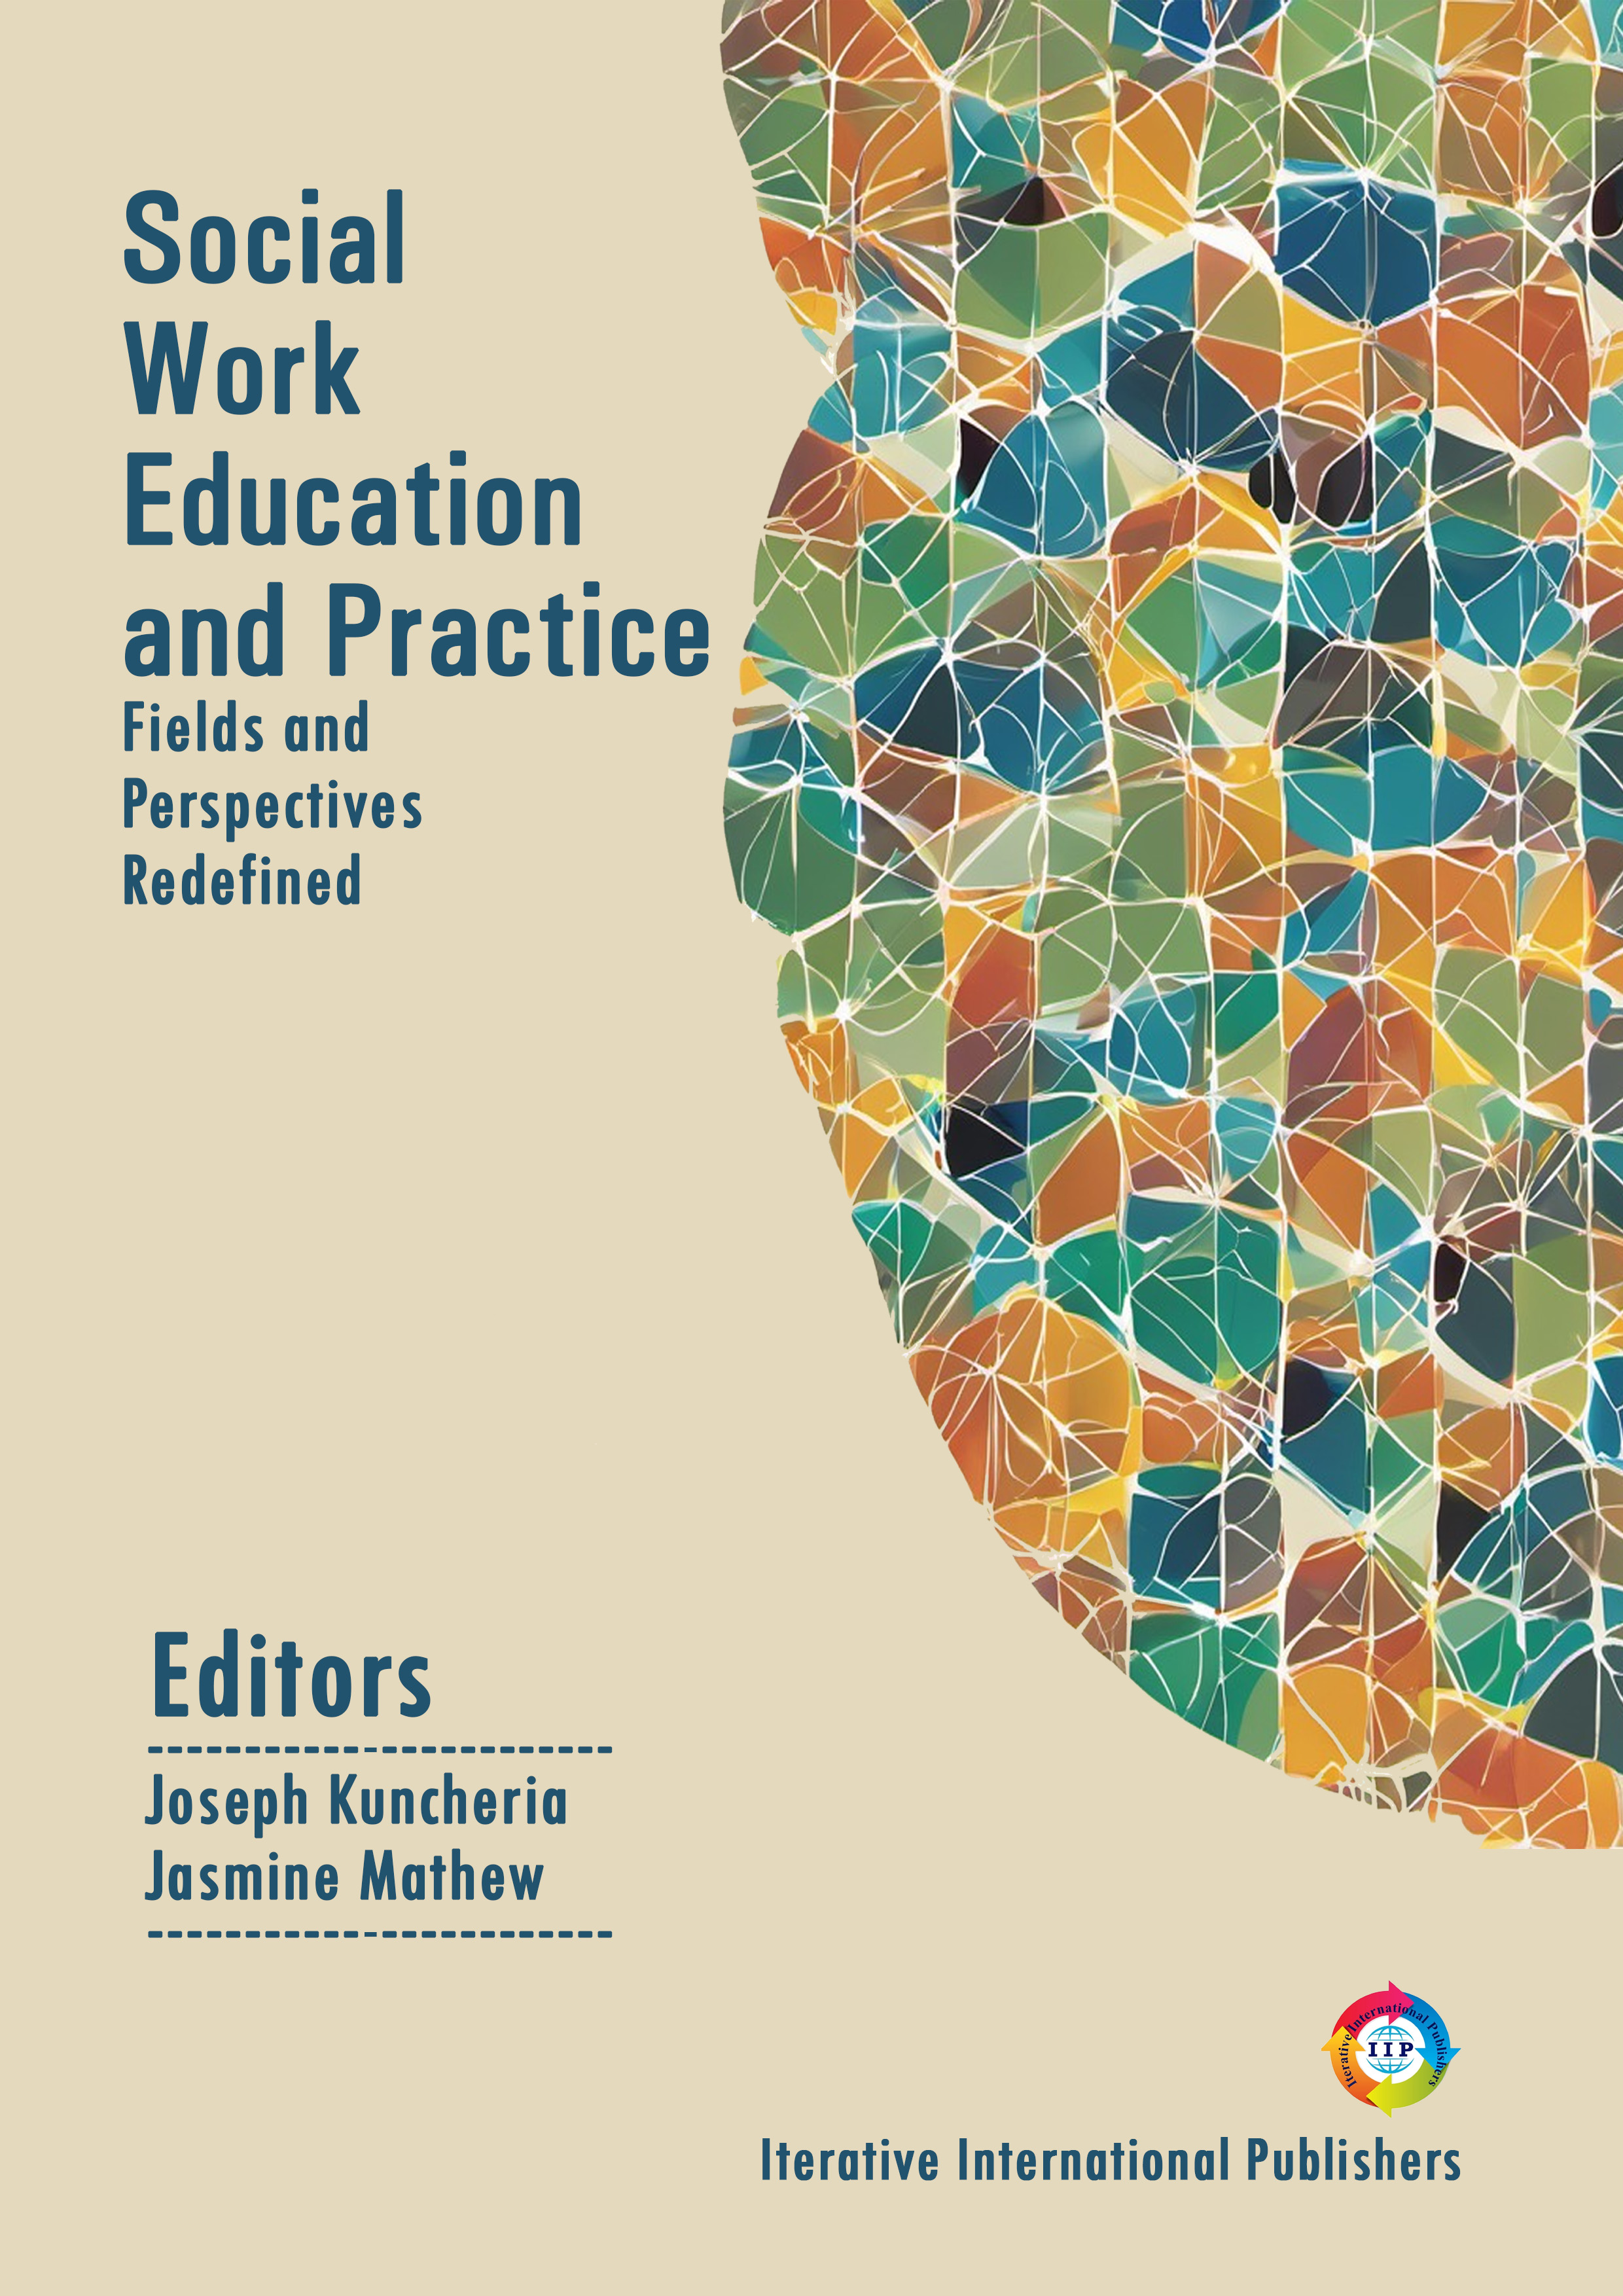 Social Work Education and Practice: Fields and Perspectives Redefined